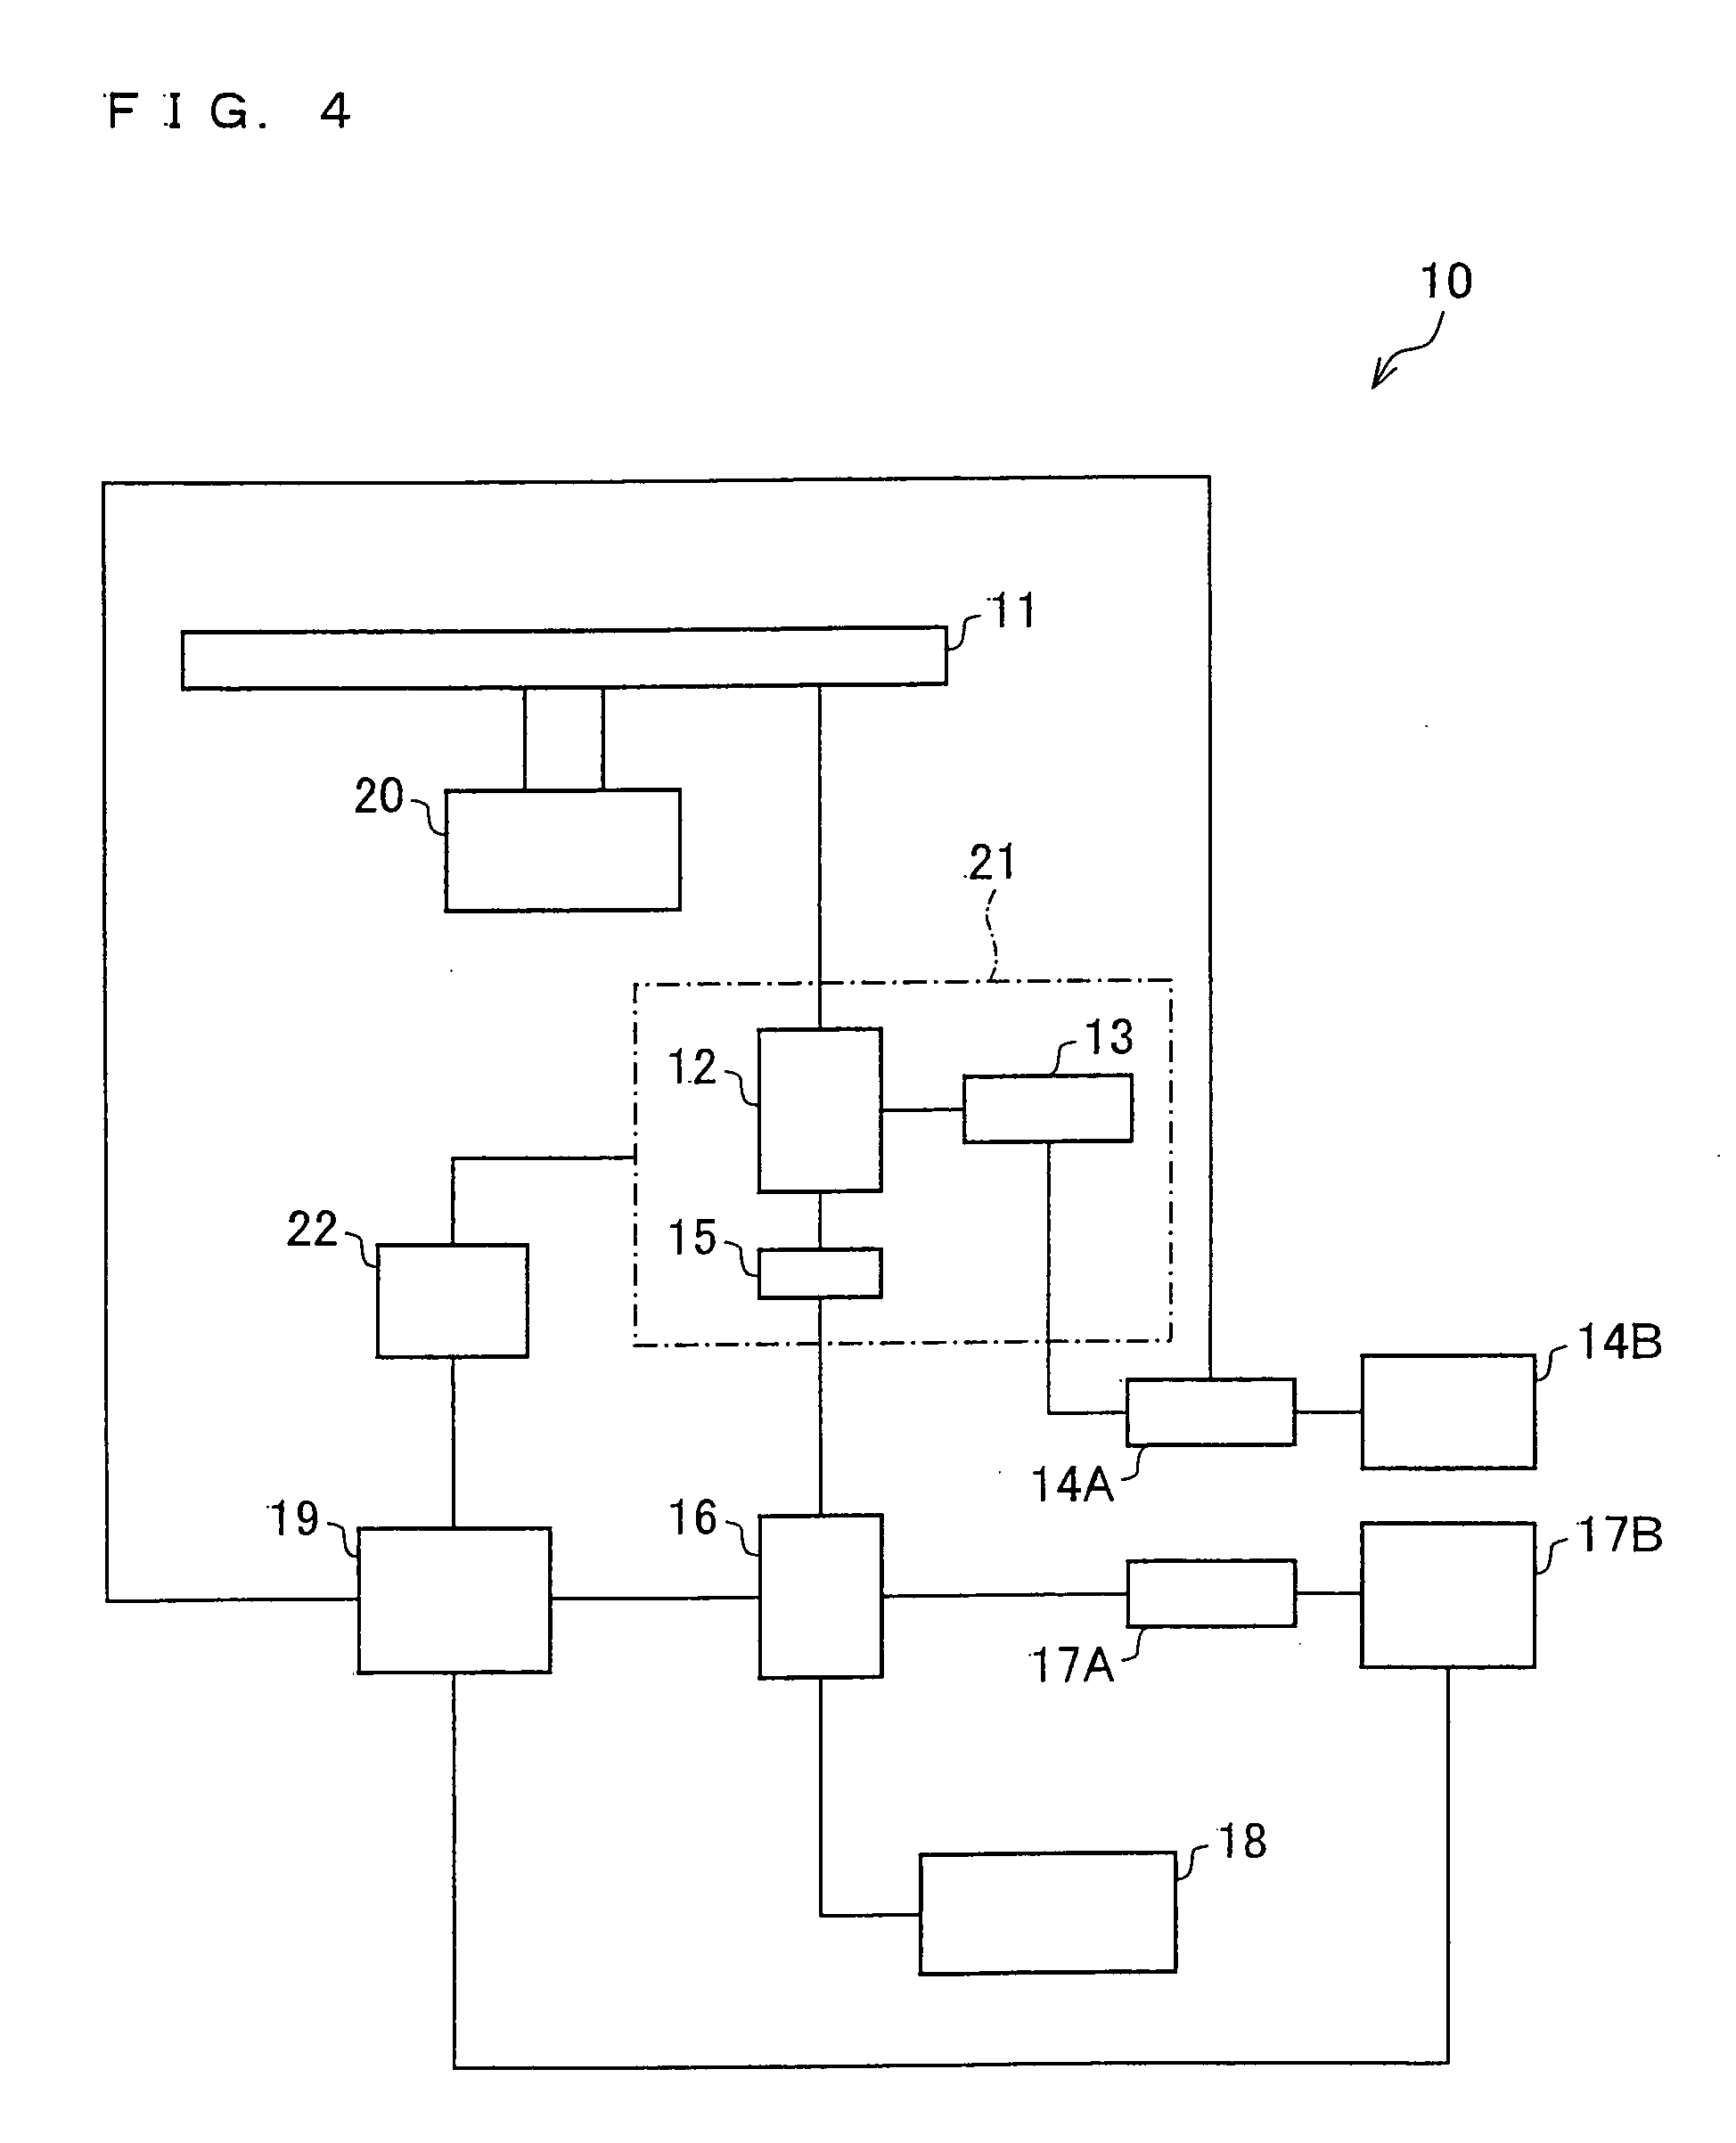 Optical Information Recording Medium, Reproducing Device for Optical Information Recording Medium, Control Method and Control Program for the Reproducing Device, and Medium with the Control Program Recorded Therein